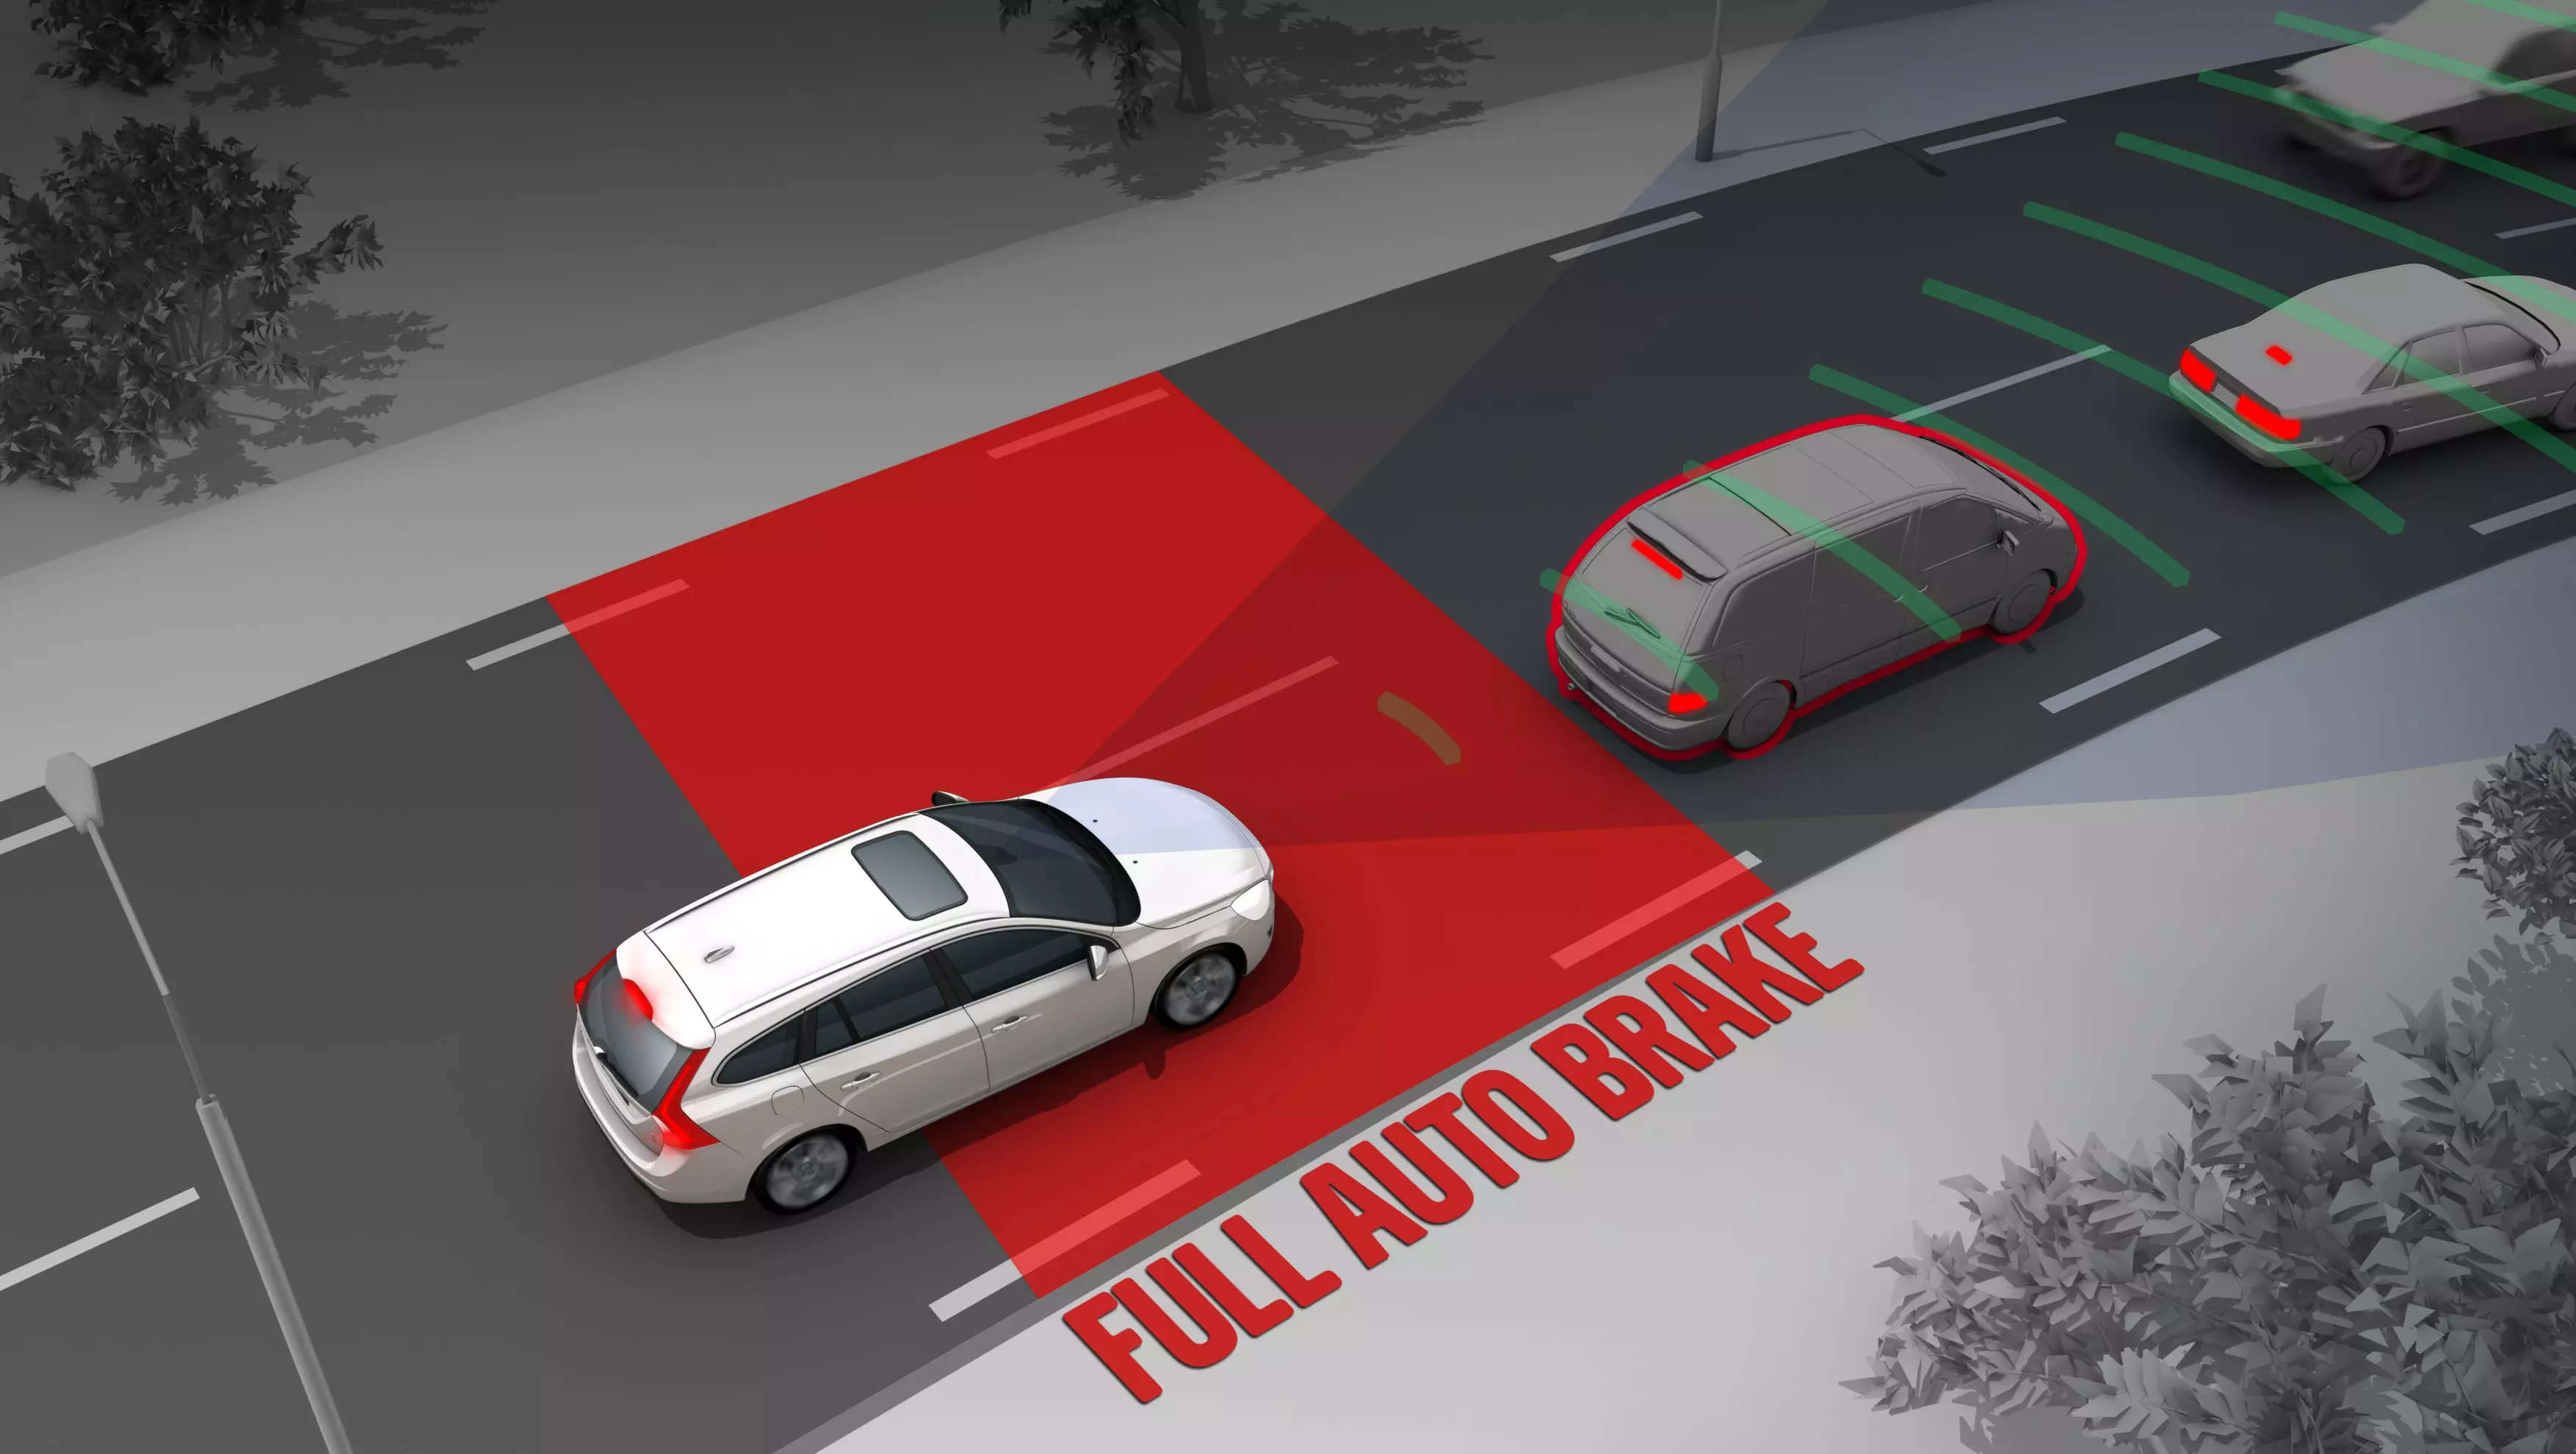 <p>AEB usually prompts an audio or visual collision warning to the driver and full braking is automatically initiated in case the driver fails to react to the situation.</p>